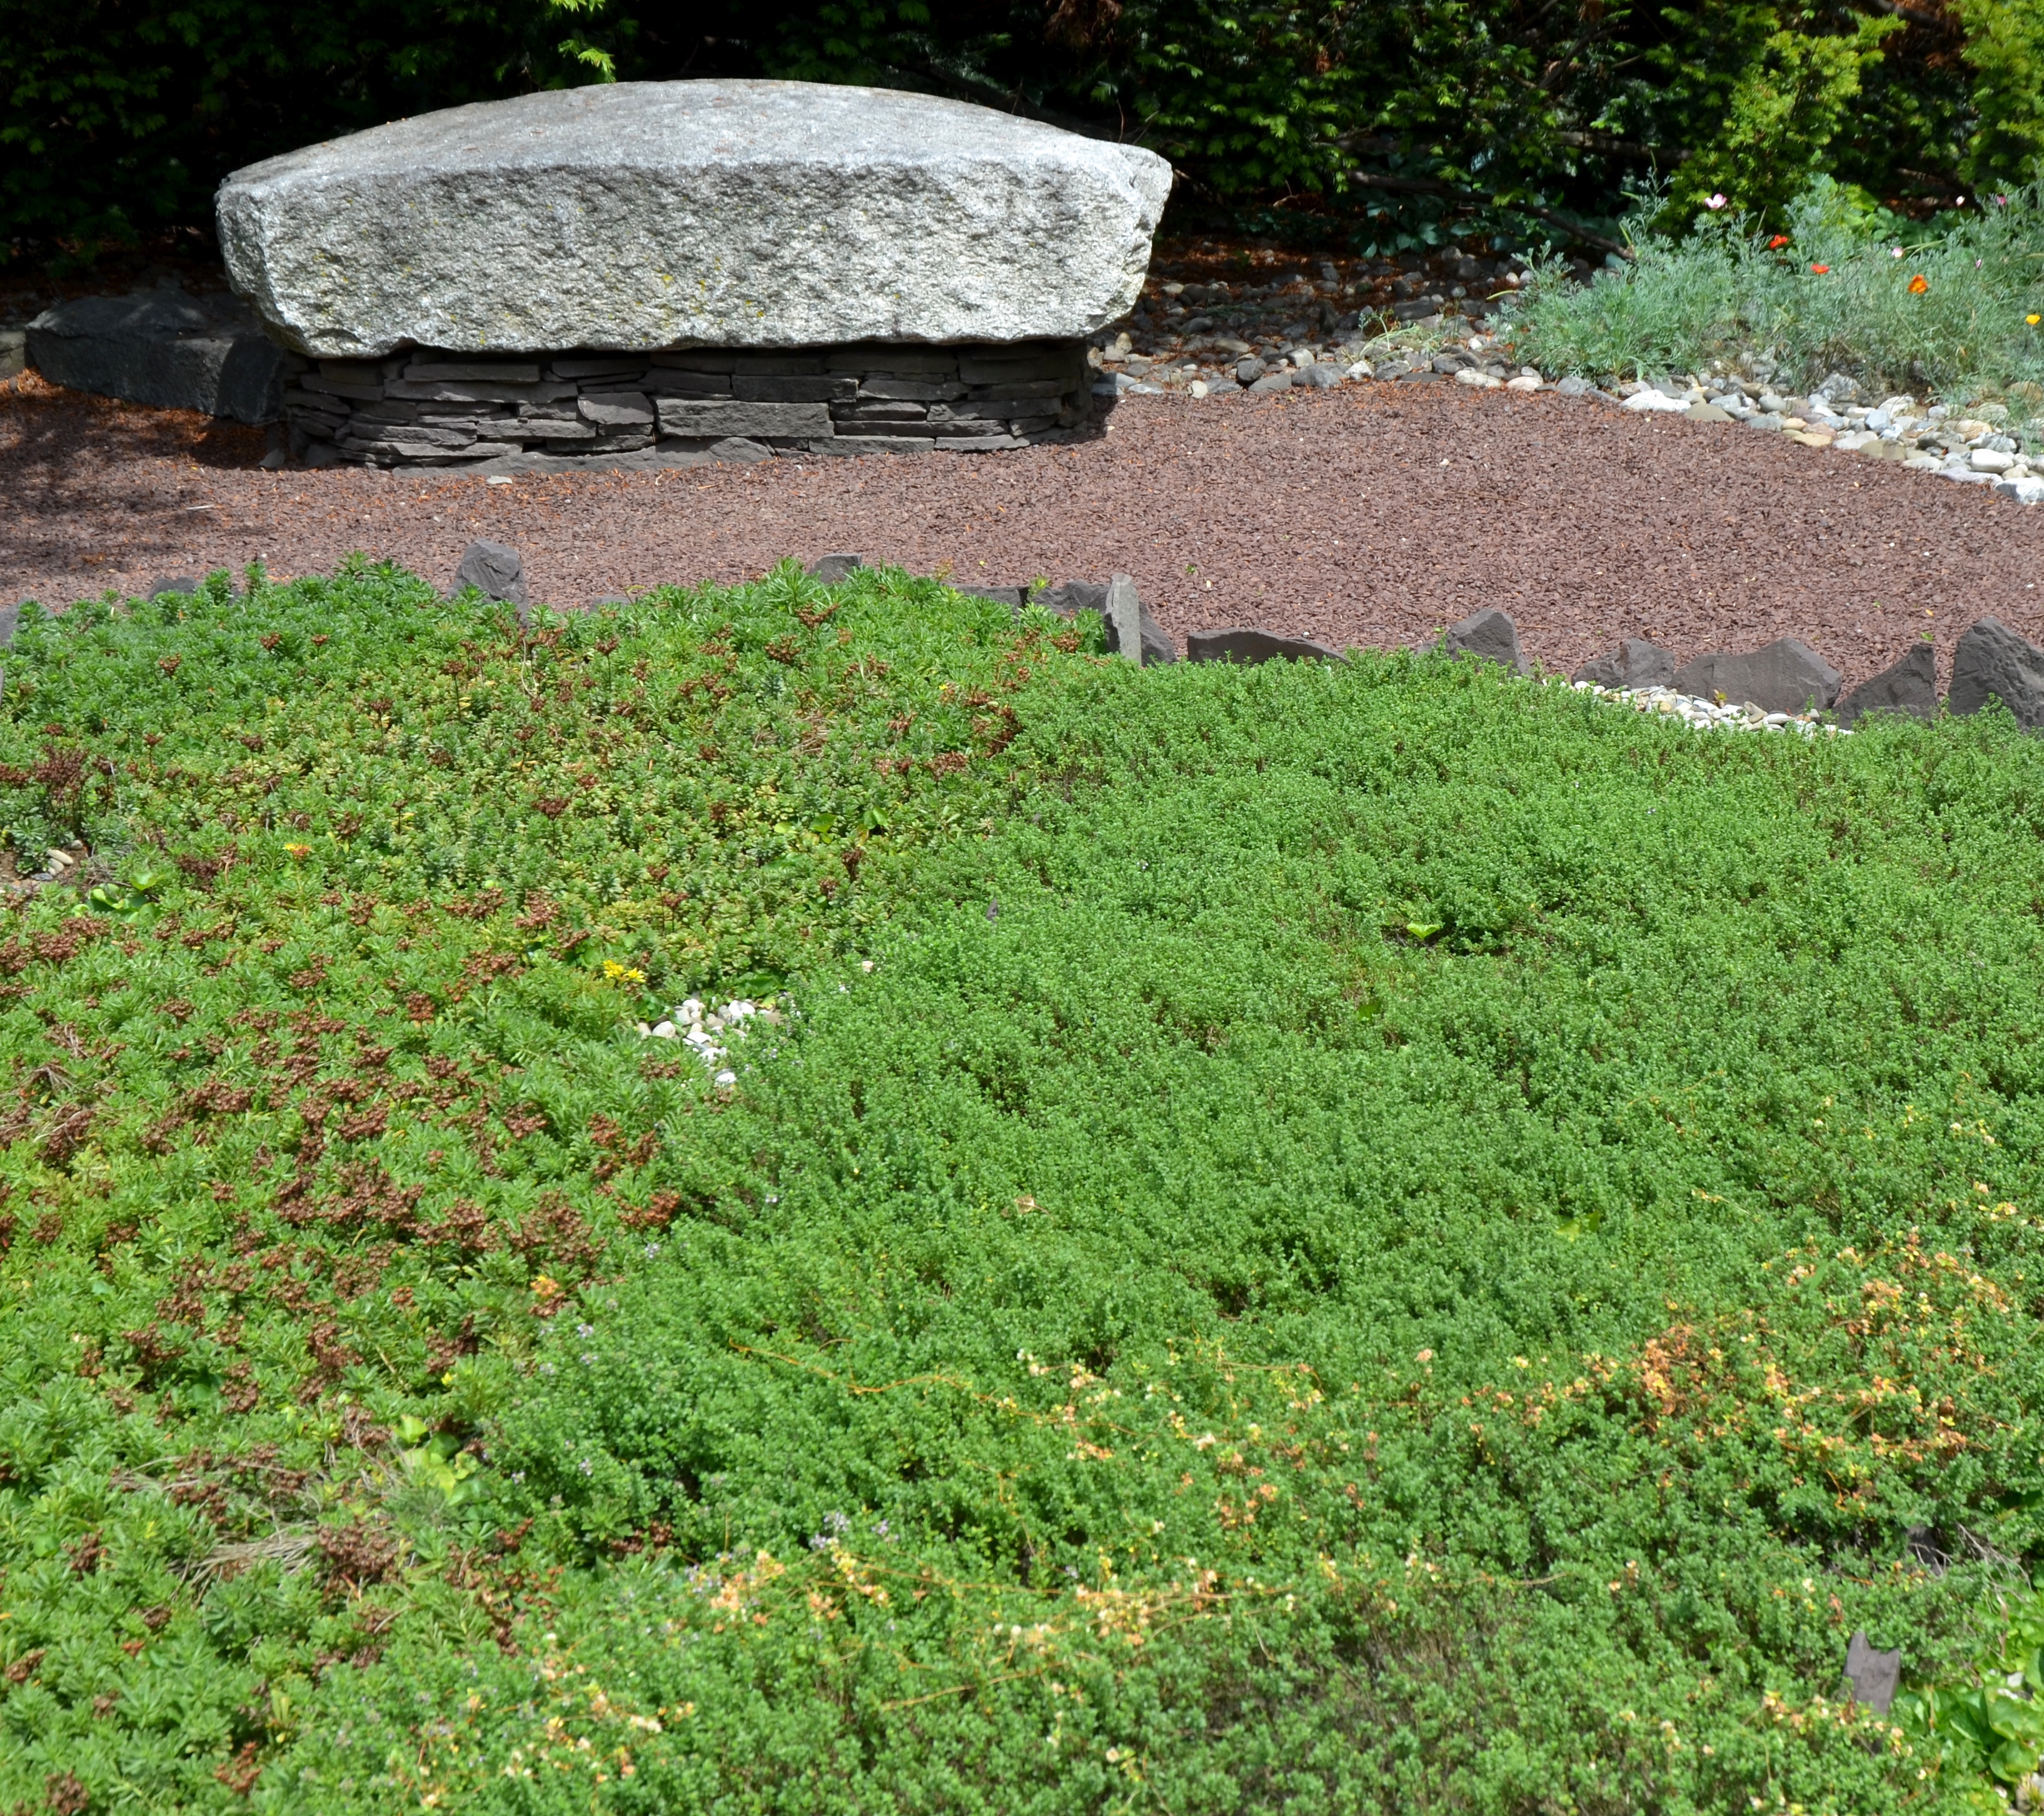 The thyme plants are about four inches. They form a fragrant carpet in the sunset garden. (Thyme Dodder is bottom left of photo).